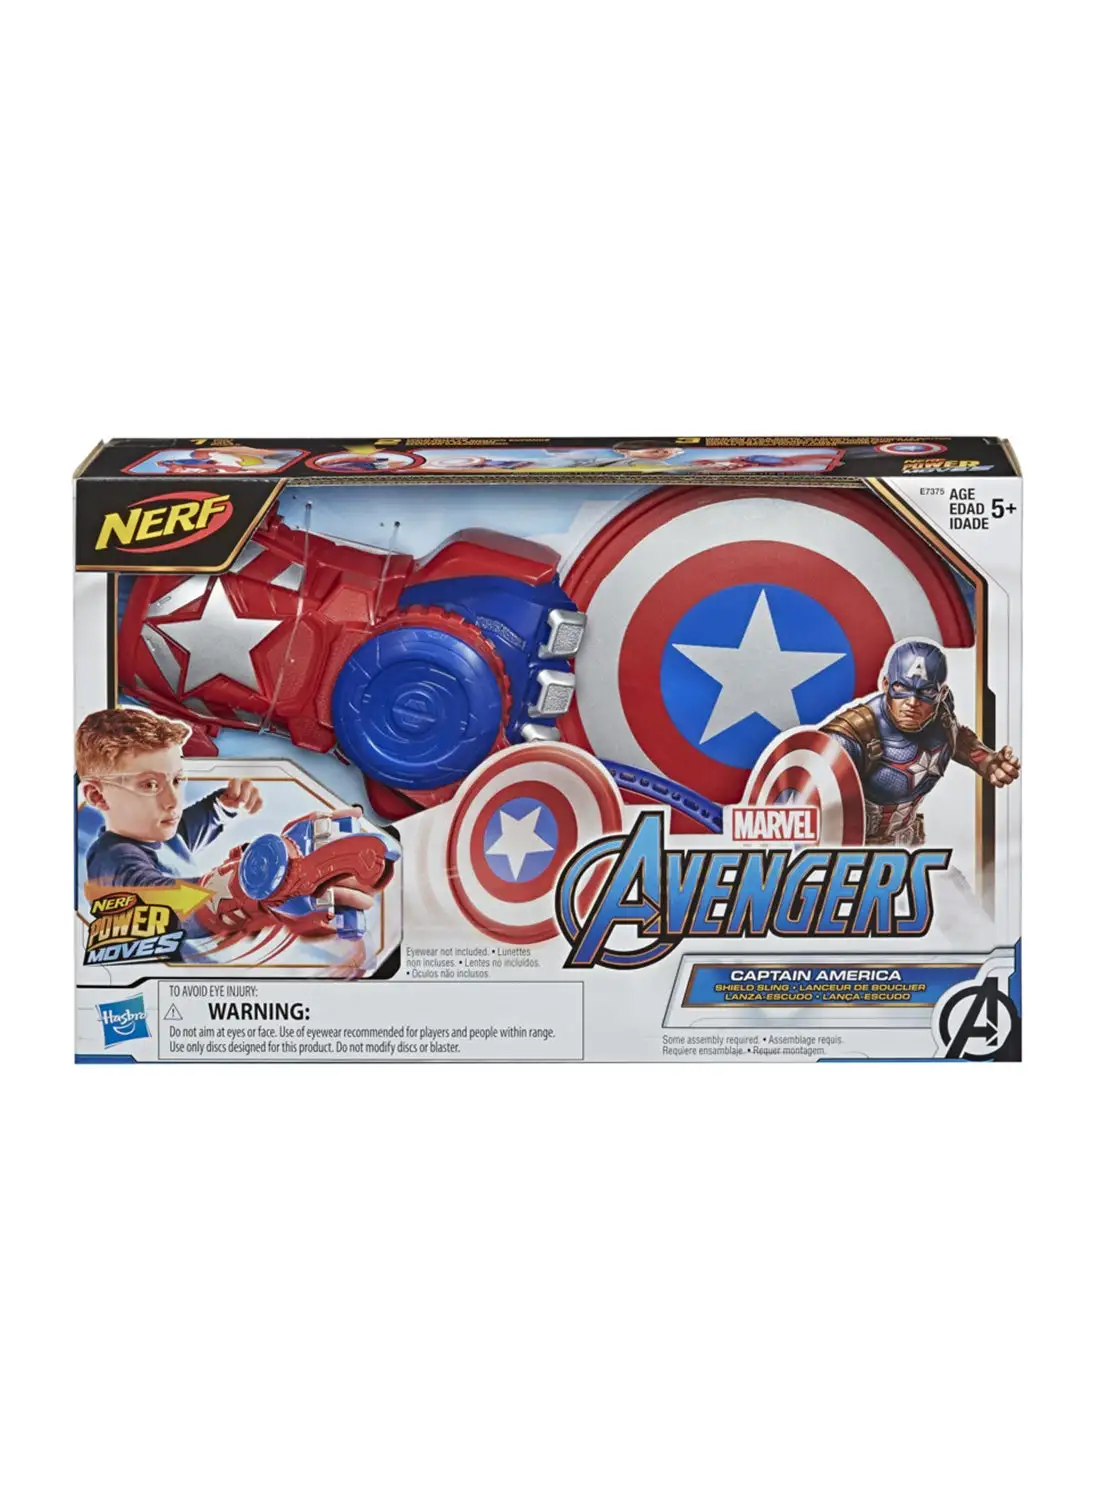 MARVEL Nerf Power Moves Marvel Avengers Captain America Shield Sling Nerf Disc-Launching Toy For Kids Roleplay, Toys For Kids Ages 5 And Up